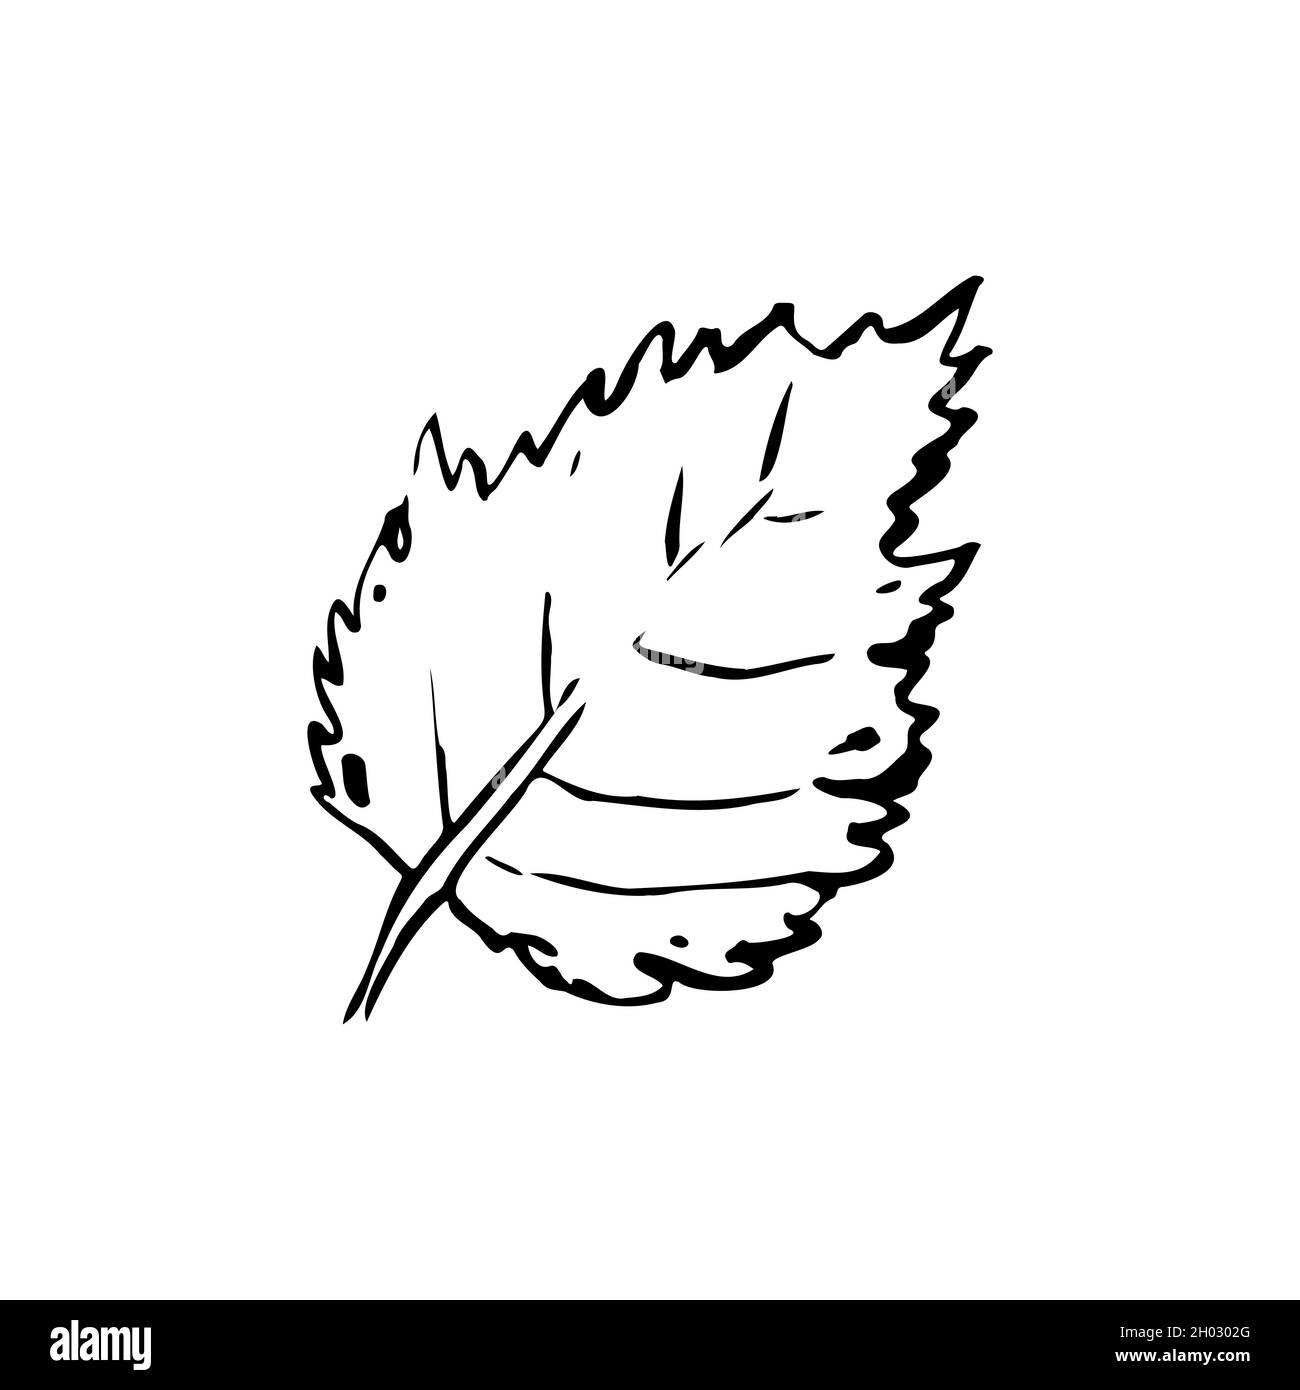 How to Draw & Shade a Leaf (Sketching Practice Tutorial) - YouTube